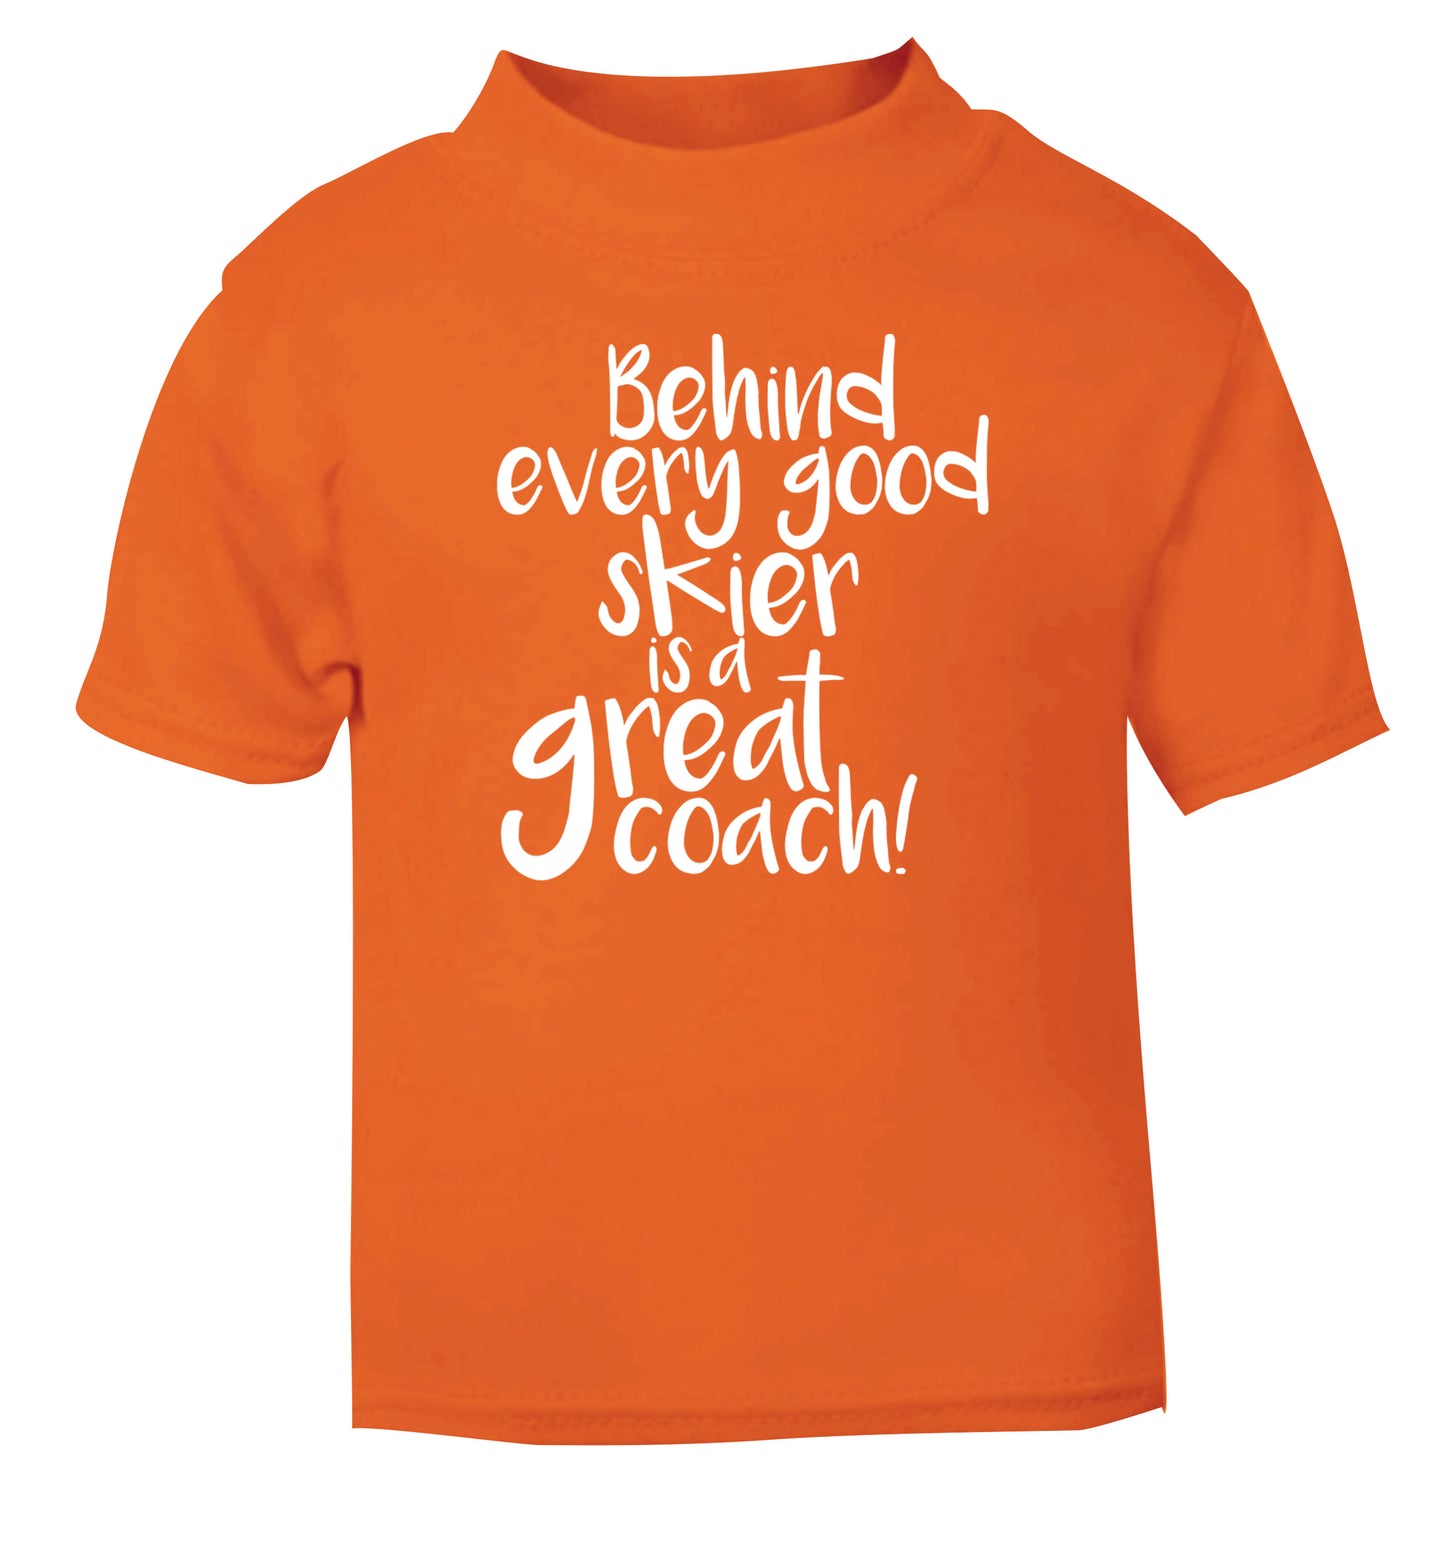 Behind every good skier is a great coach! orange Baby Toddler Tshirt 2 Years